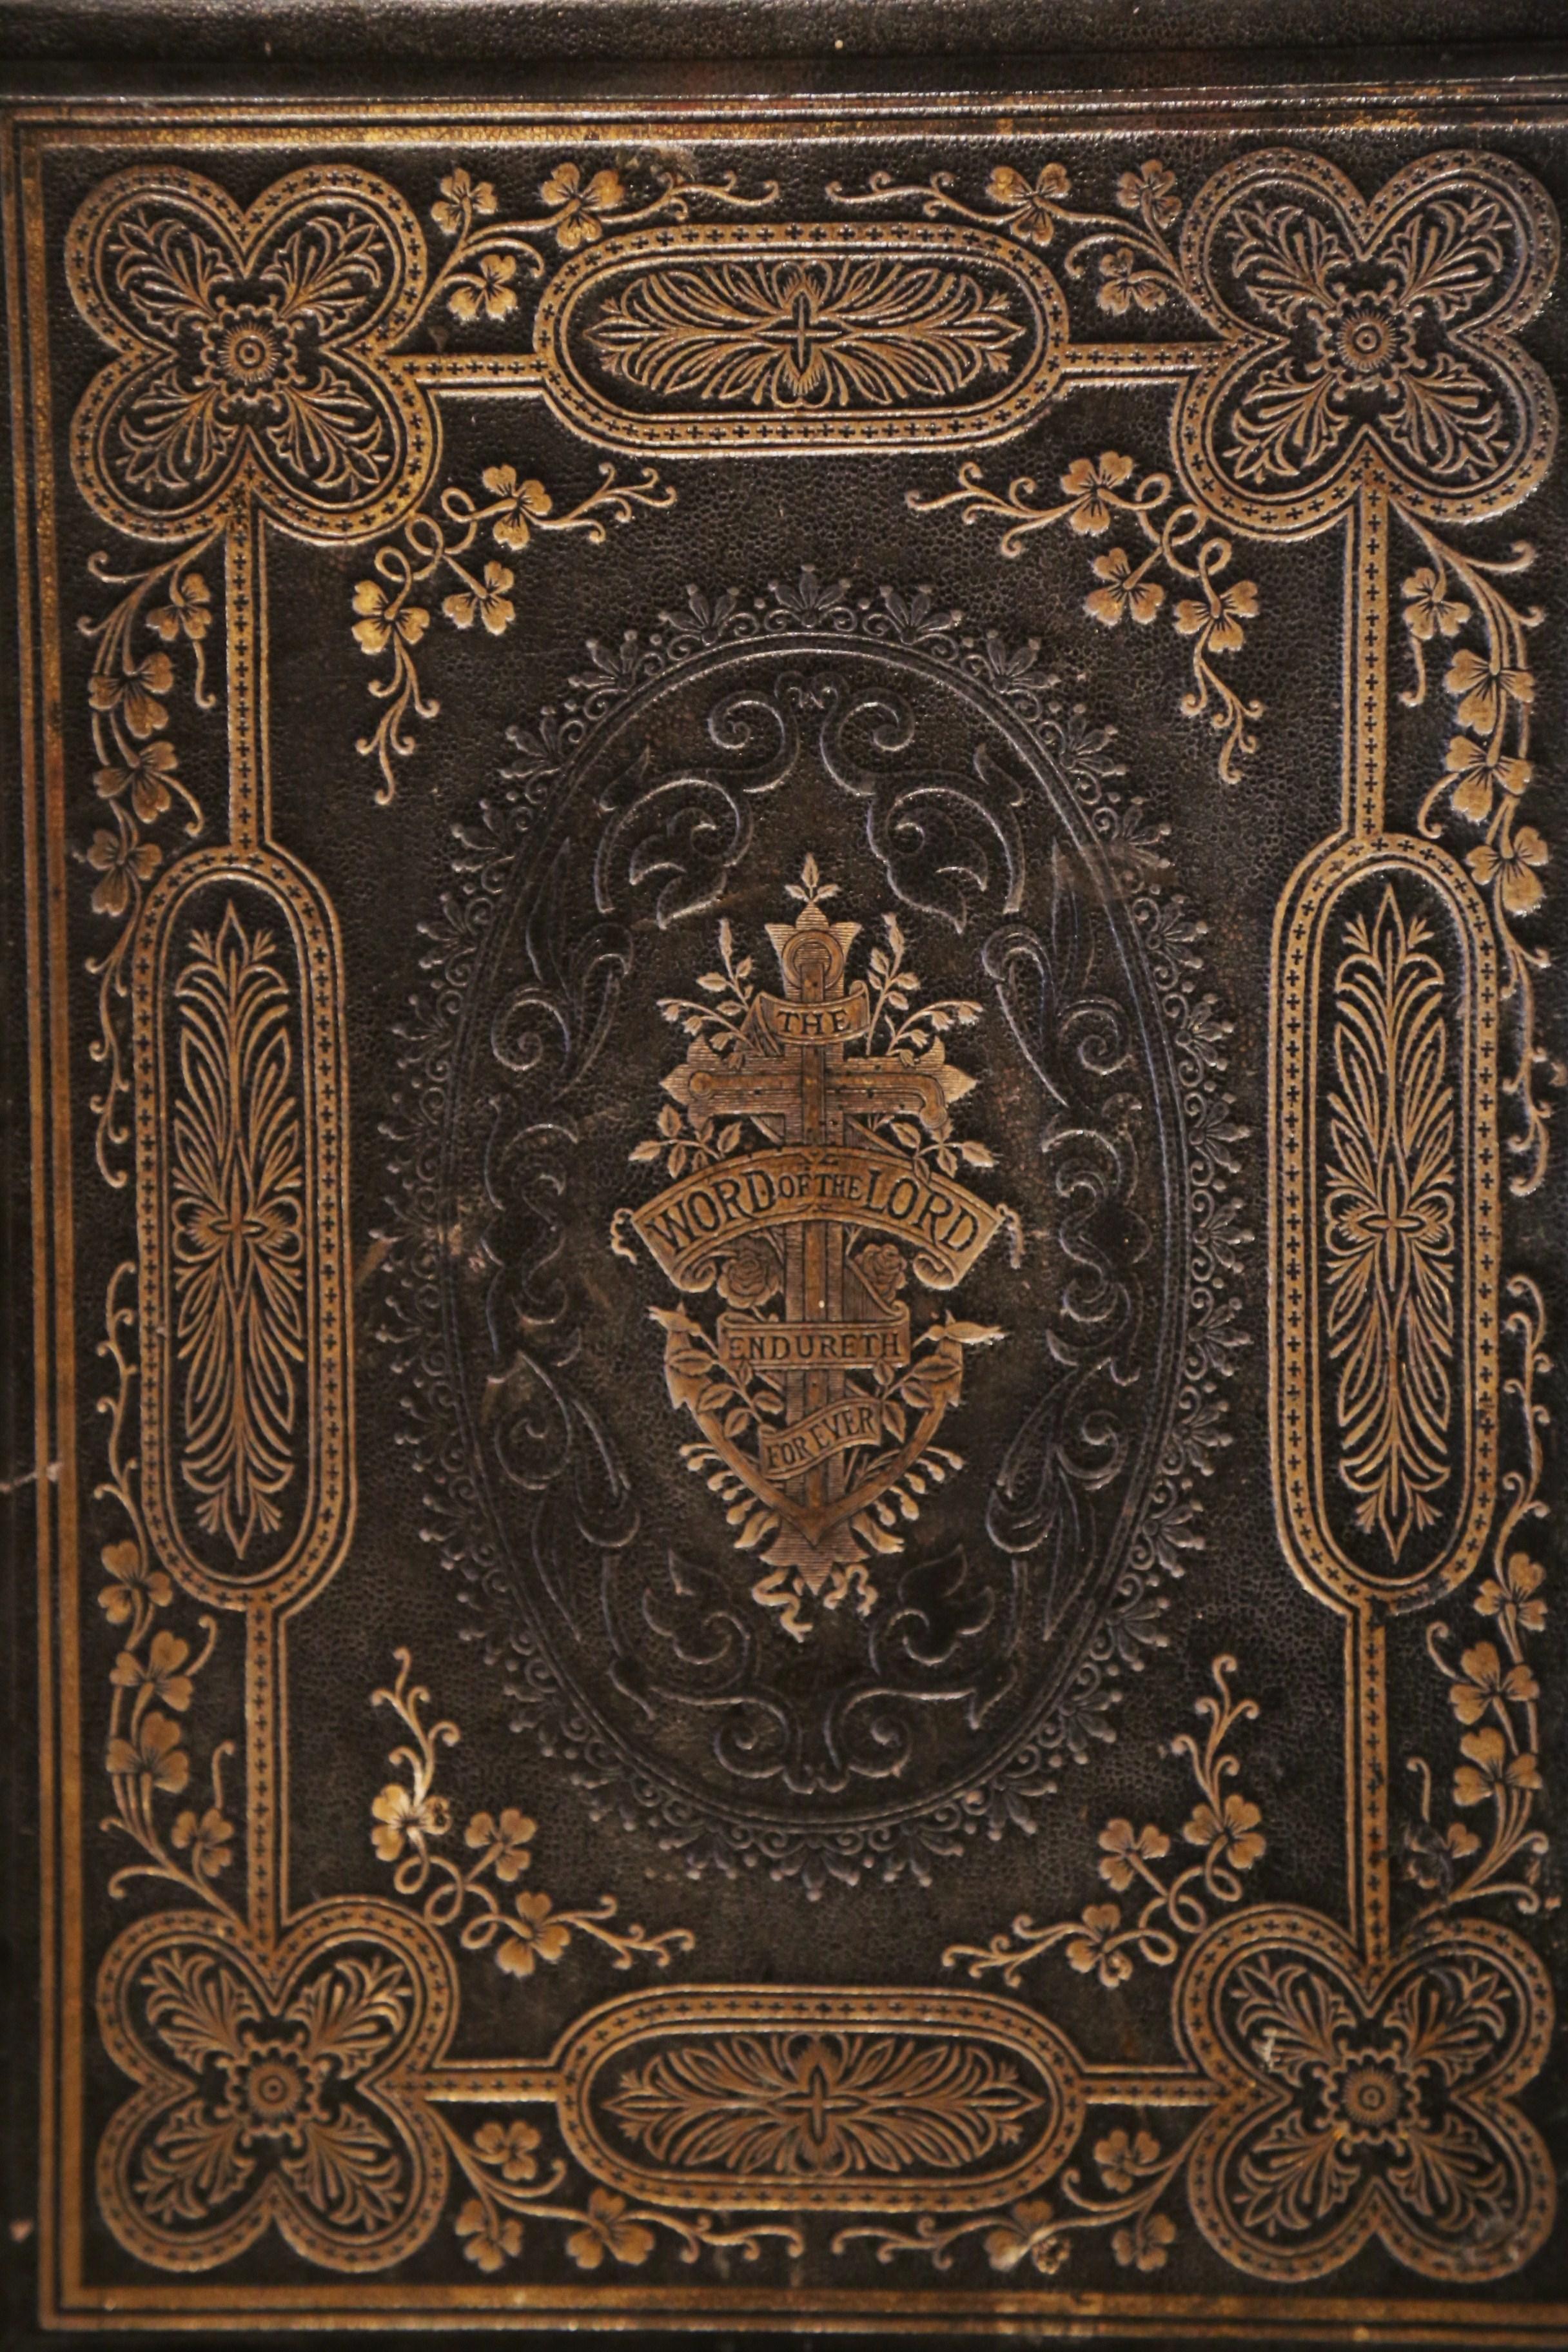 This beautiful antique family bible by Rev. John Brown was printed by Dunn & Wright, Glasgow, circa 1880. The book flaunts an engraved brown leather and gilt covering, and is embellished with two brass locks and embossed brass edges. Inside, the